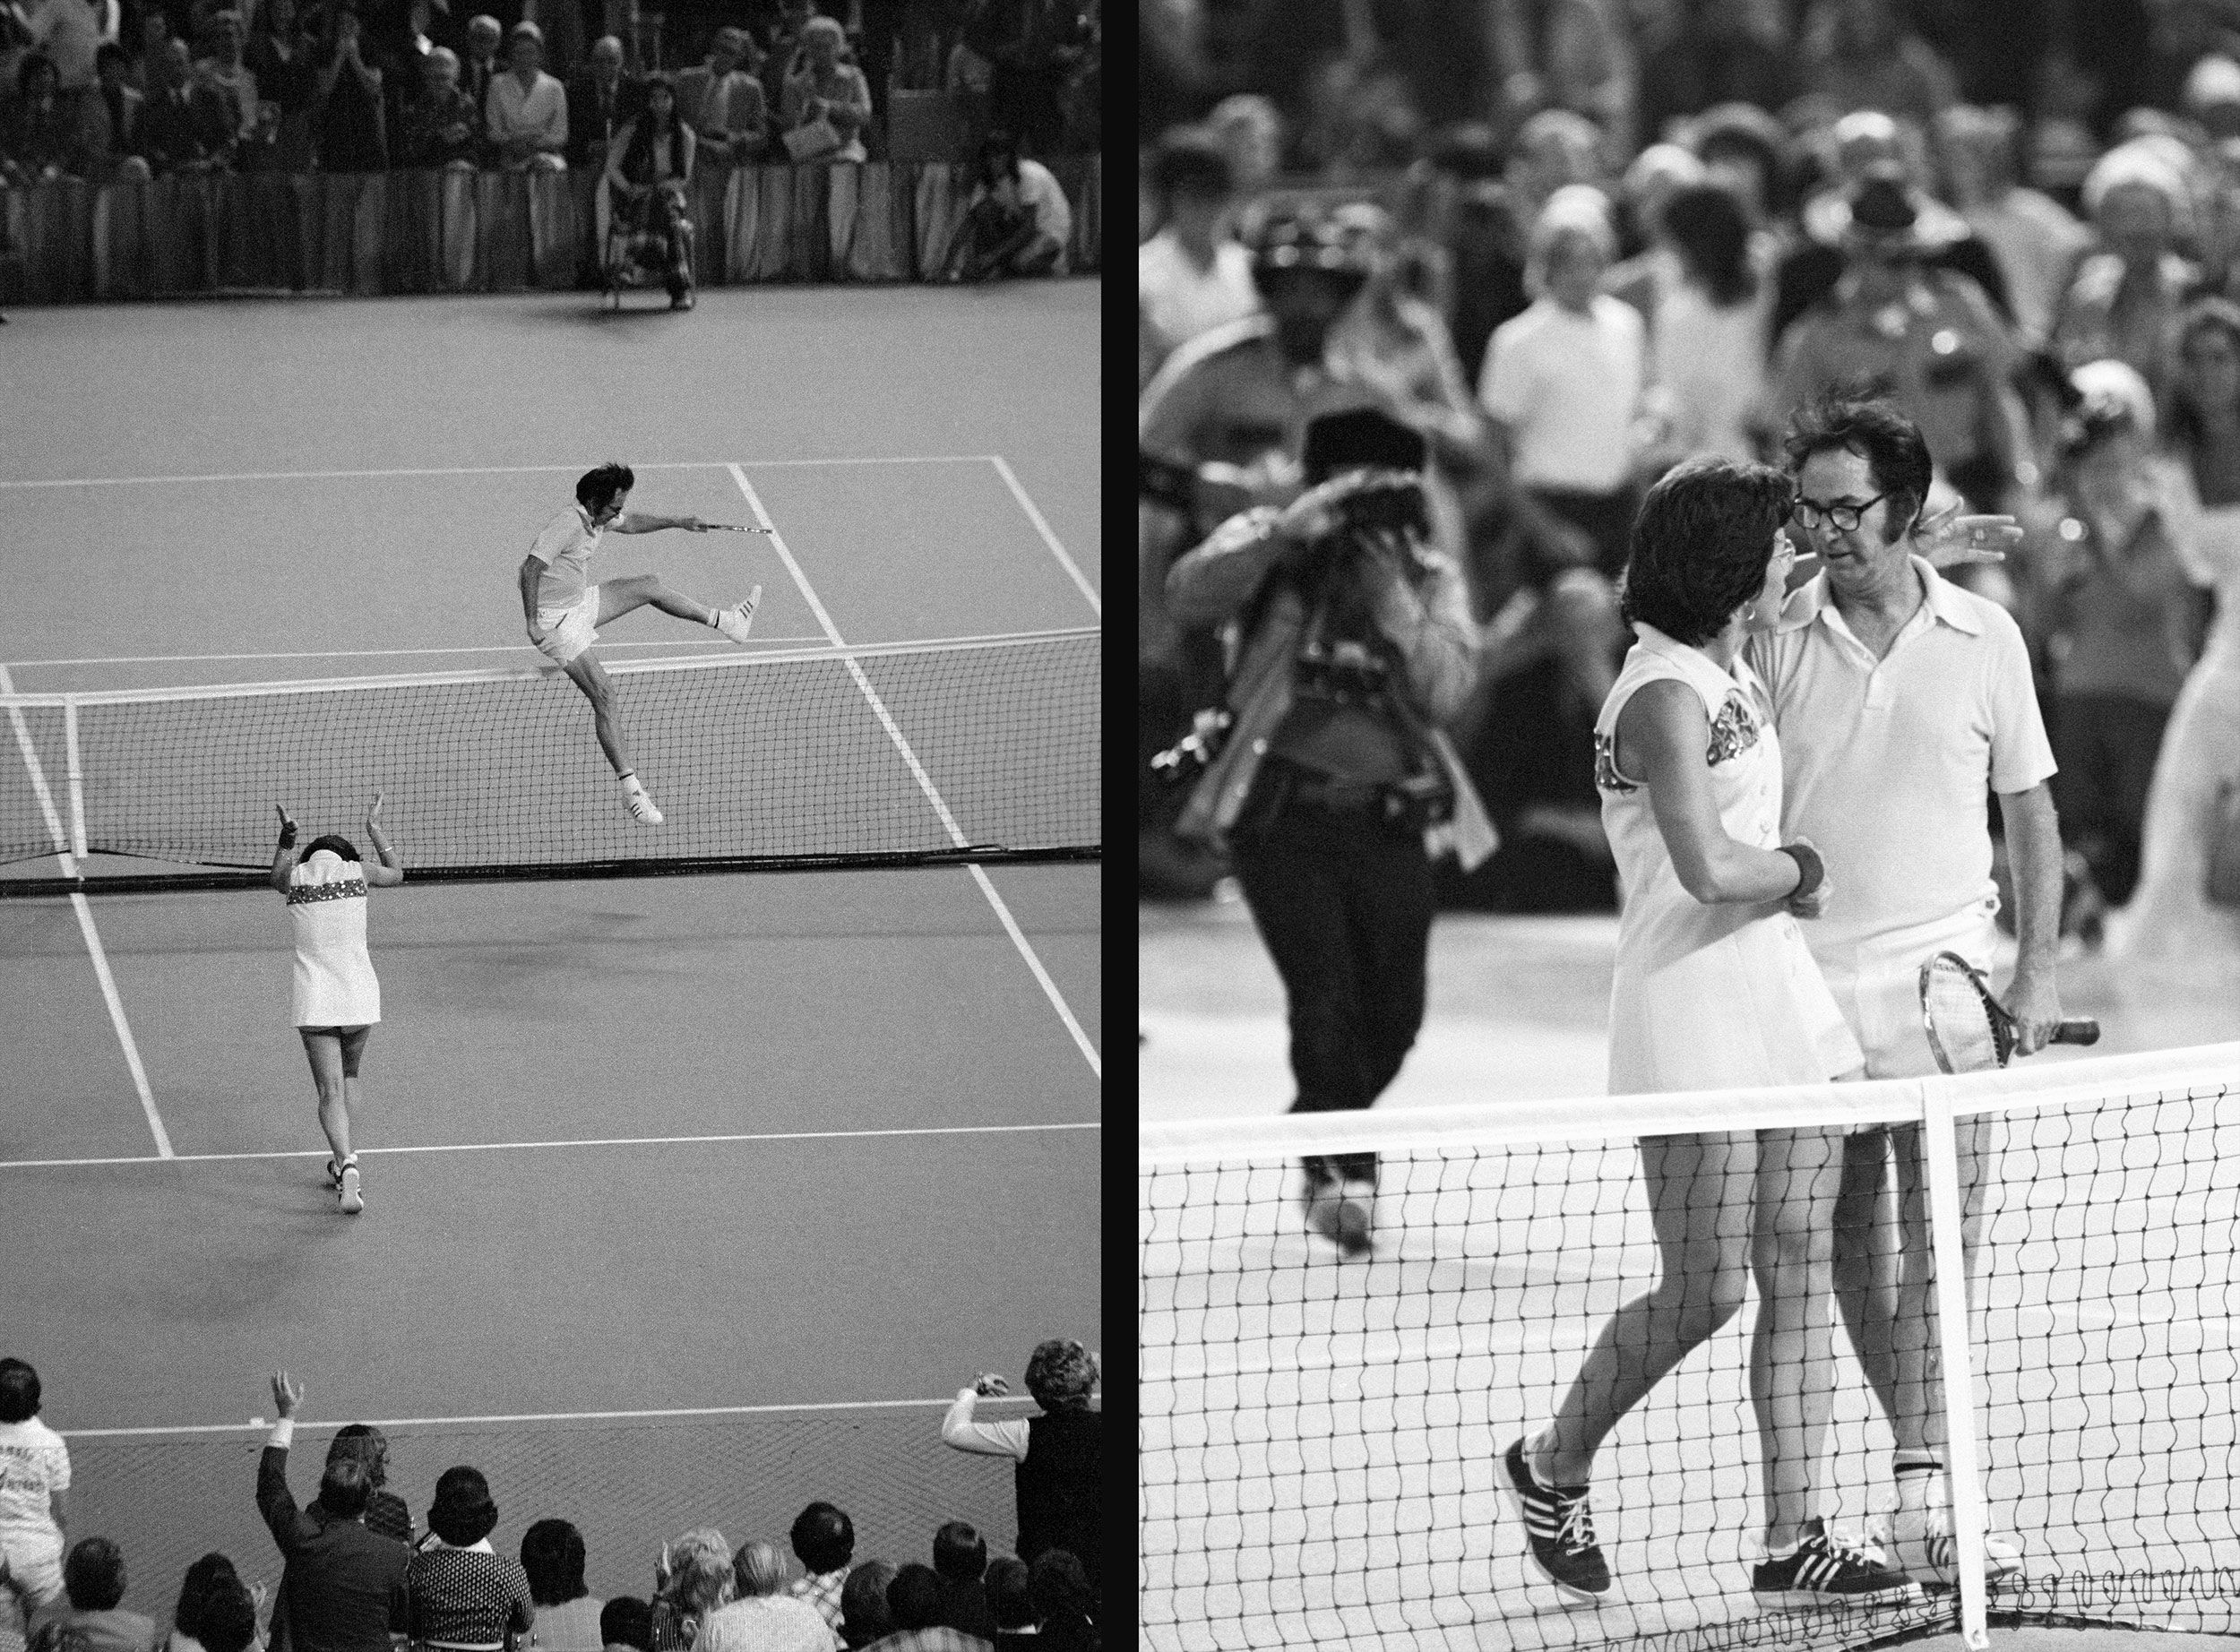 Photos: When Billie Jean King won the 'Battle of the Sexes